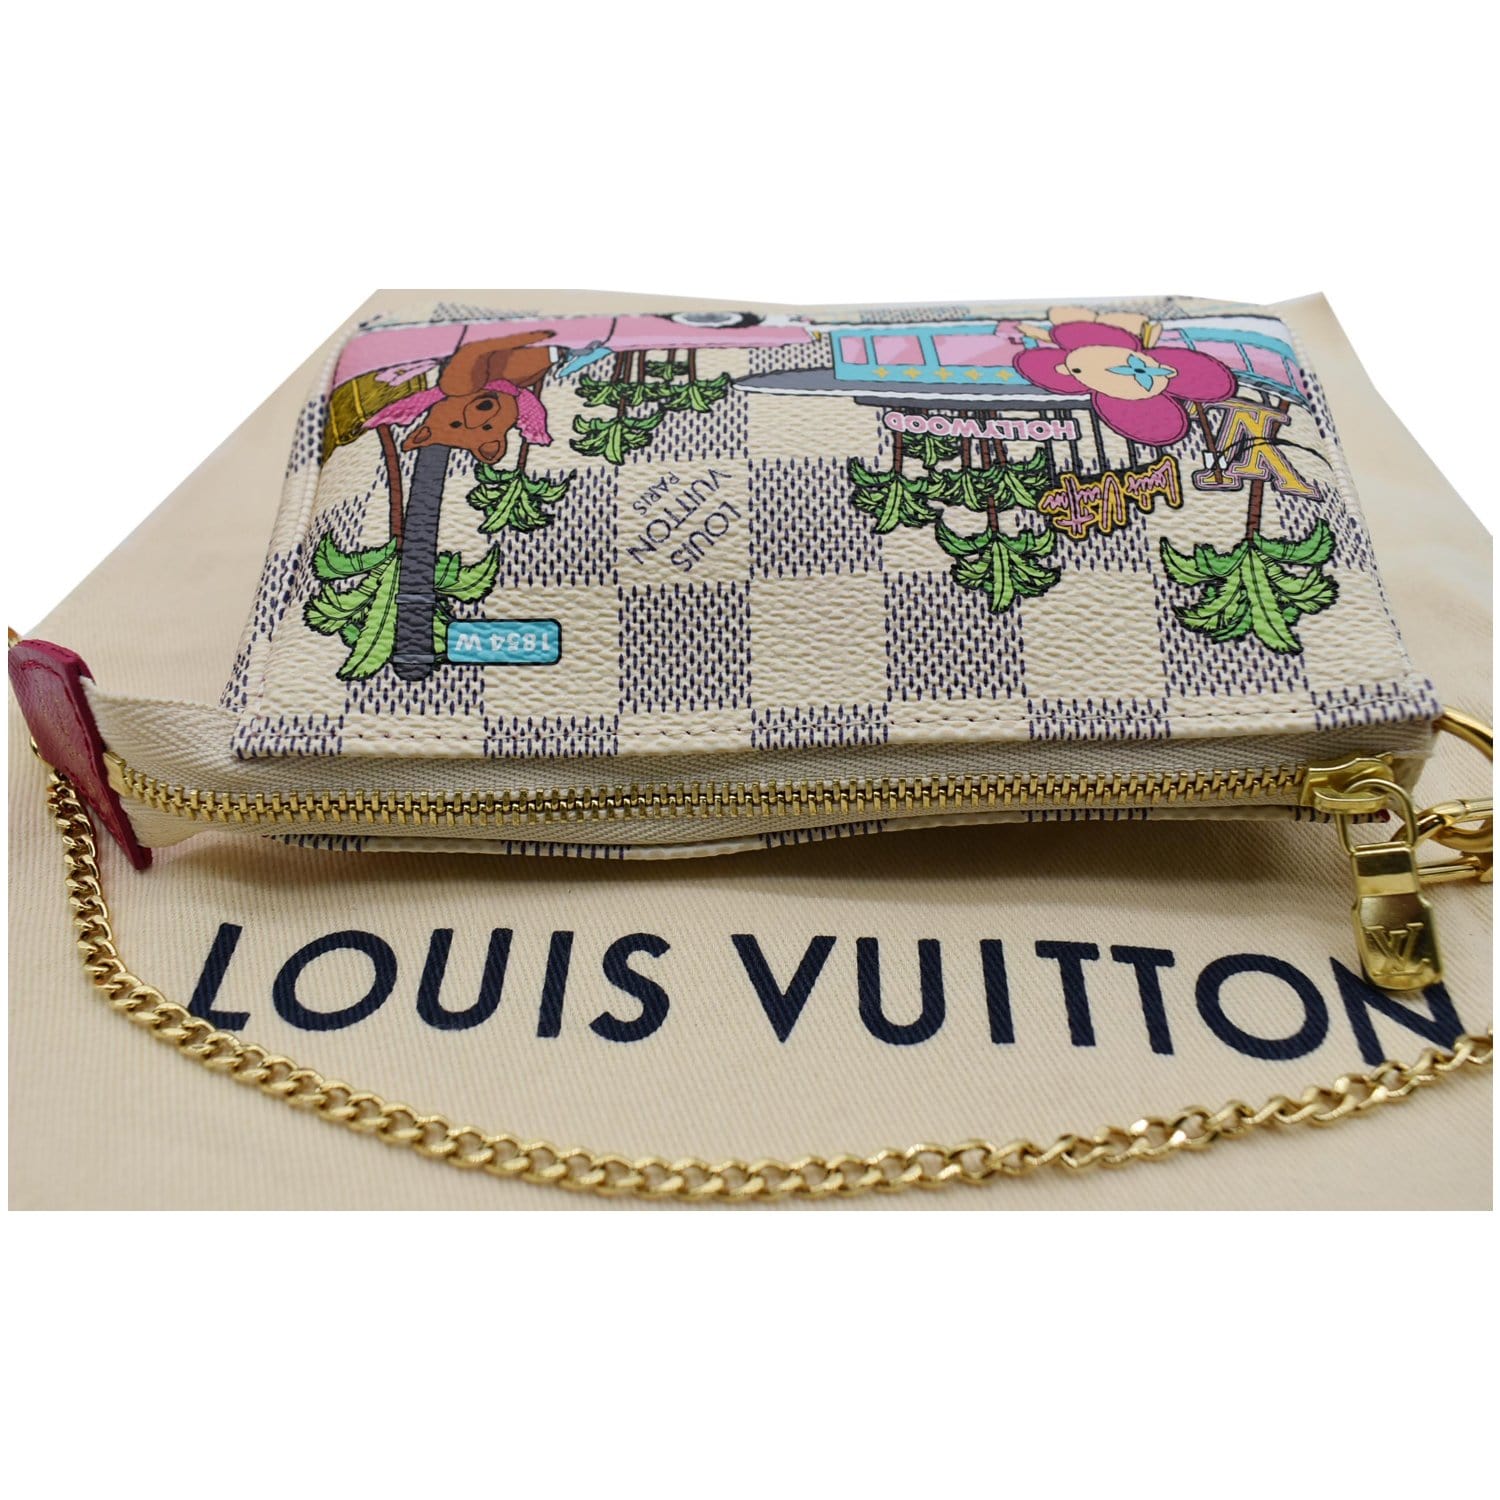 Happy Thursday just got in the Louis Vuitton Christmas animation 2022  pochette cles key cles. 🤩💝🥰 it's so cute #lvchristmasanimation…